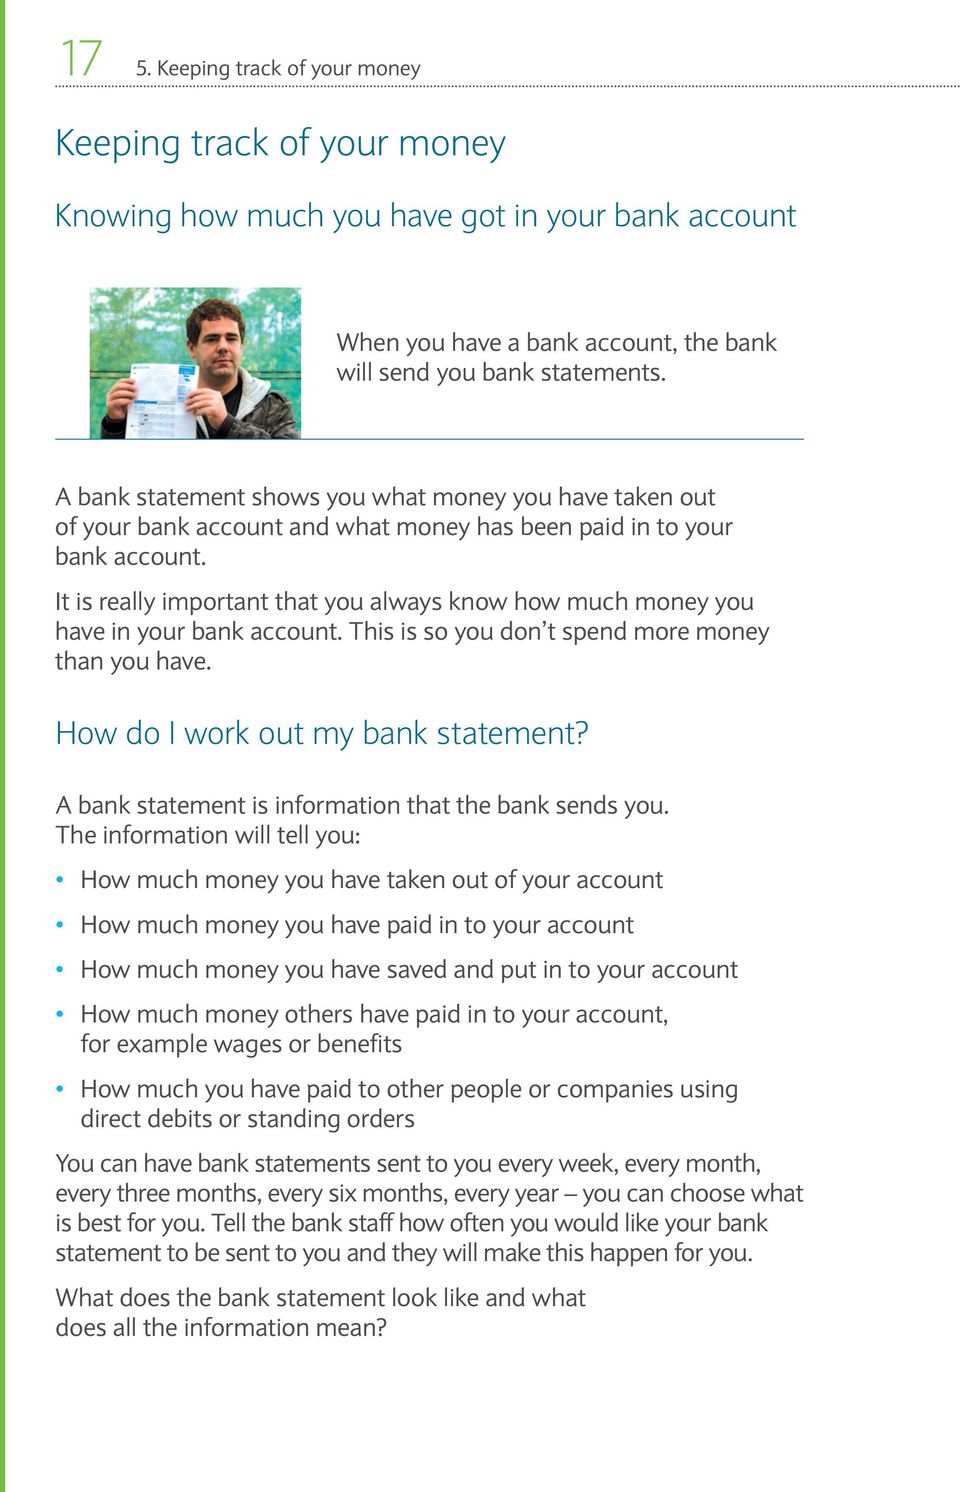 It is really important that you always know how much money you have in your bank account. This is so you don t spend more money than you have. How do I work out my bank statement?